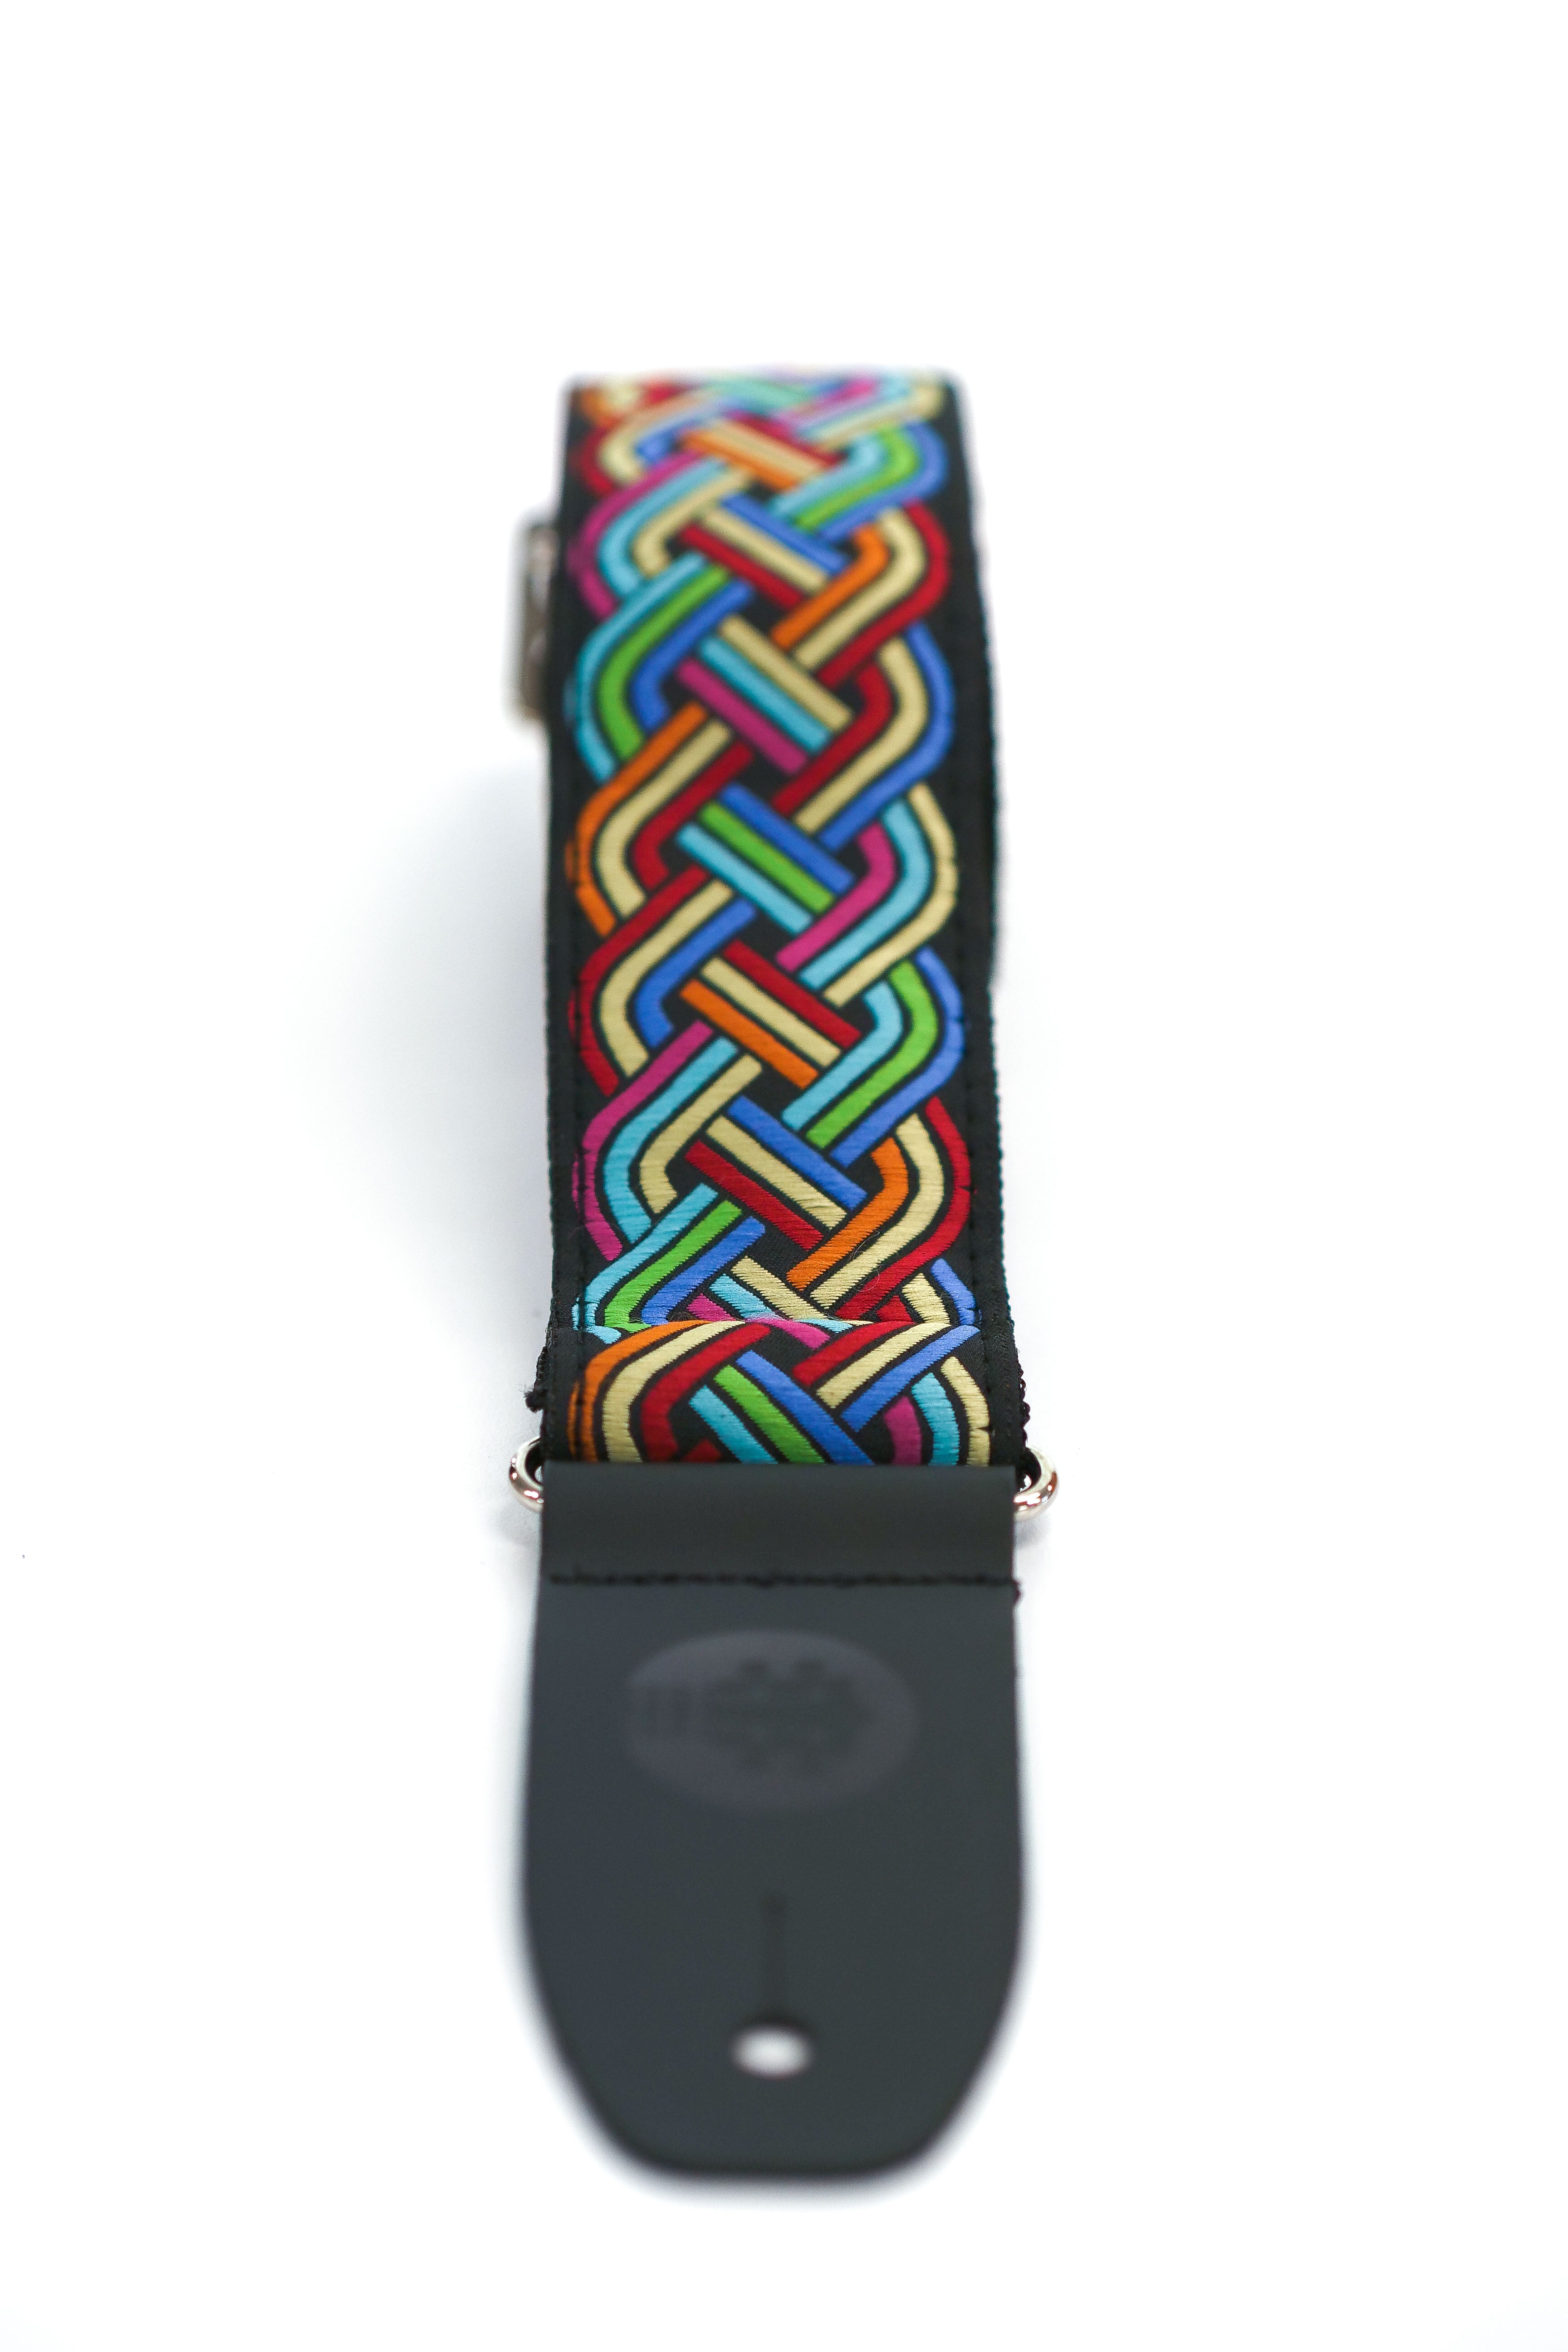 Terry Carter Music Store 2 Inch Deluxe Jacquard Guitar and Ukulele Strap - RETRO BAND